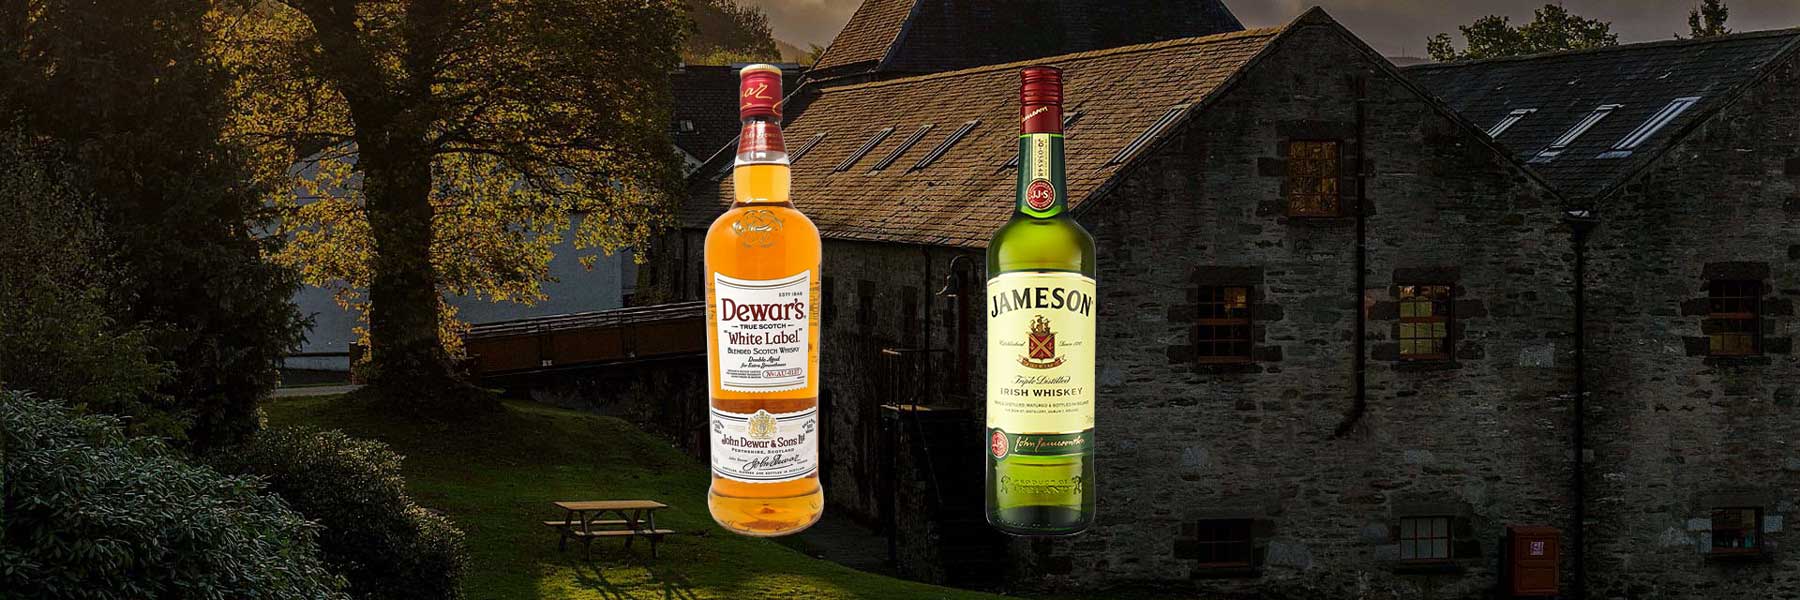 Dewars vs Jameson | How do these signature bottles stack up?